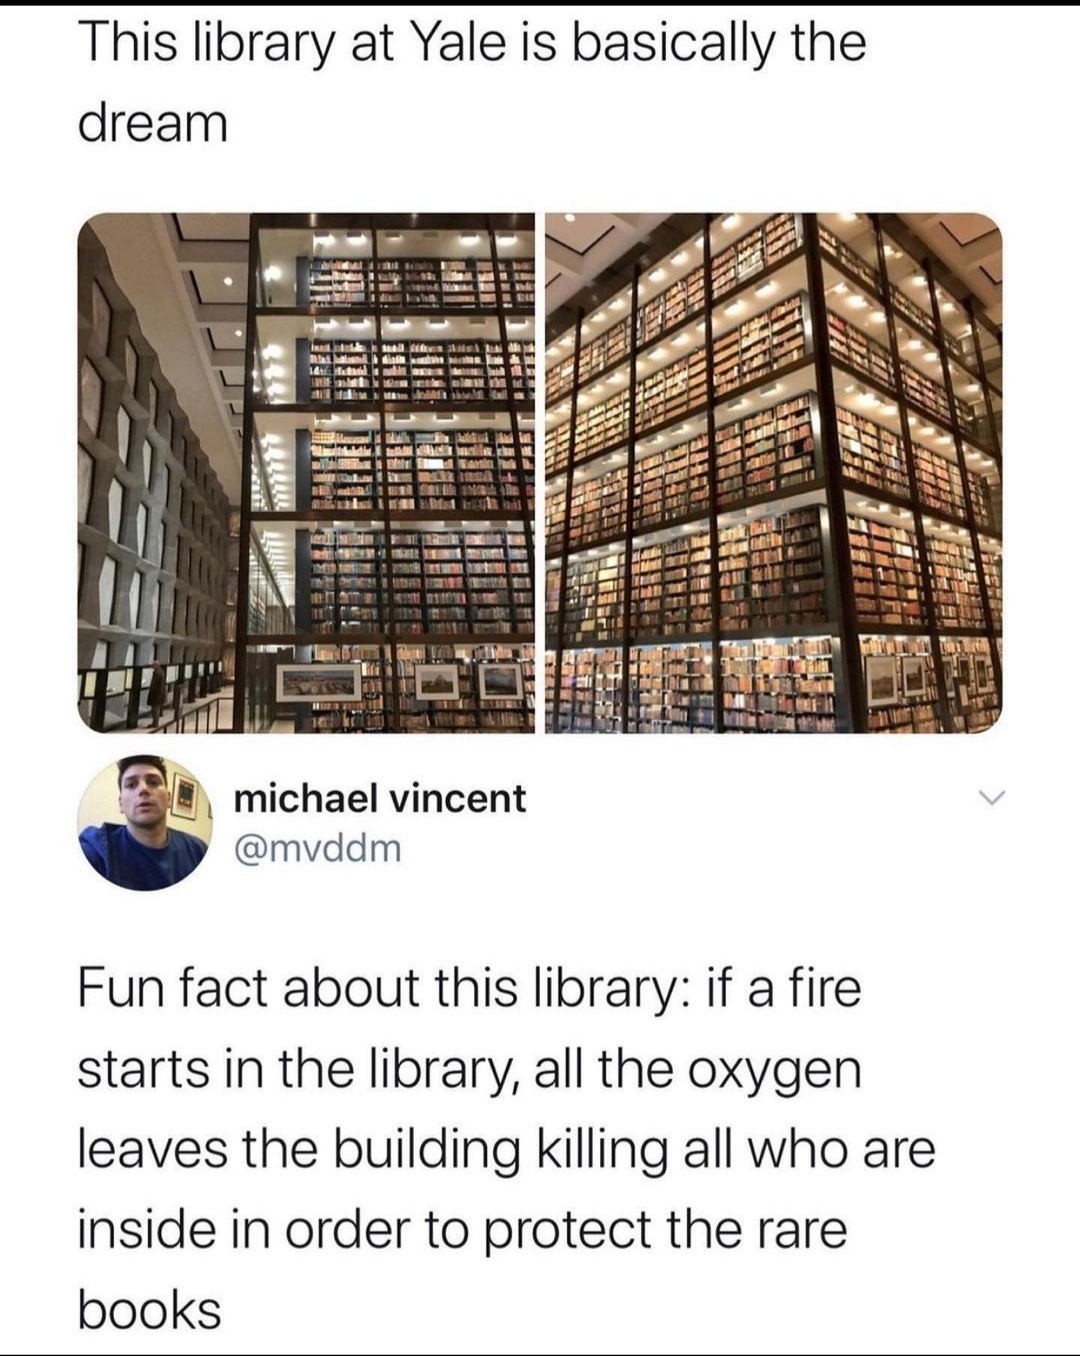 Save the books at all costs...